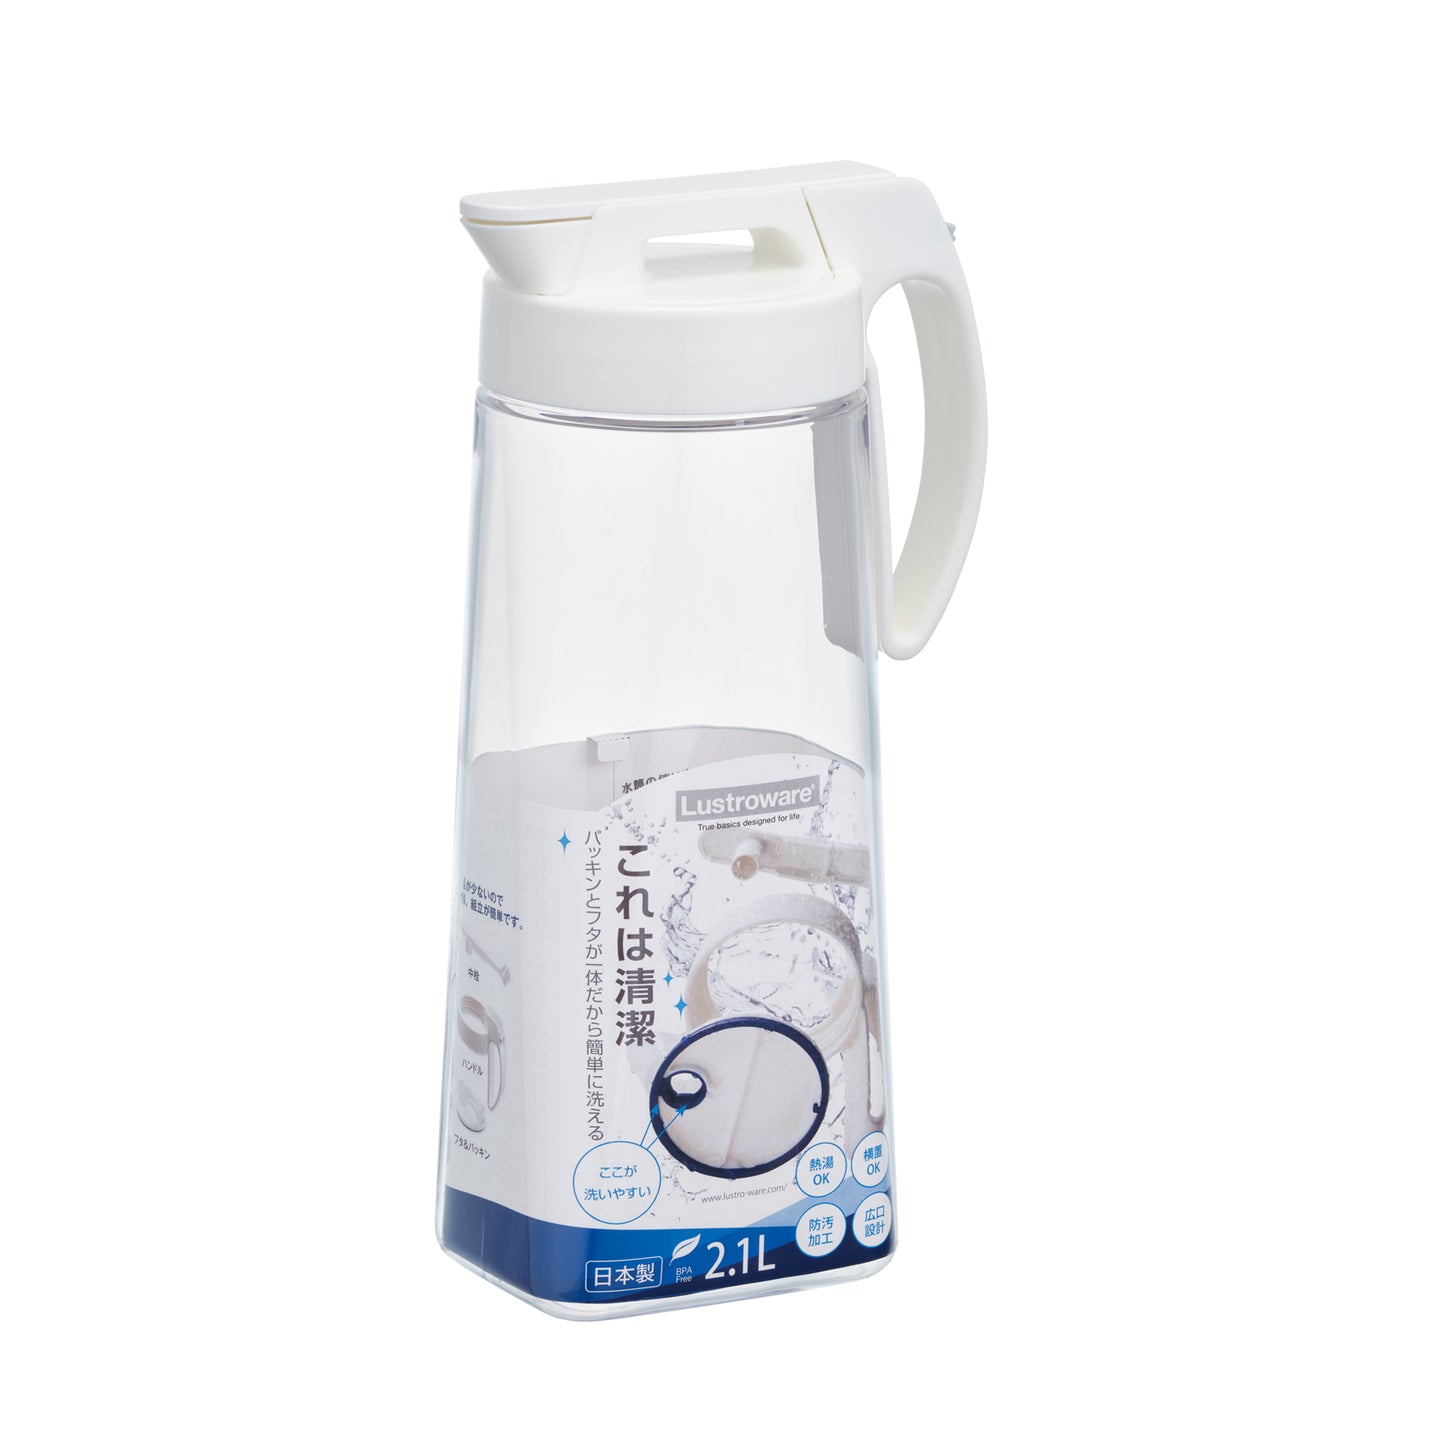 Lustroware Water Pitcher-2.1L White K-1276-NW